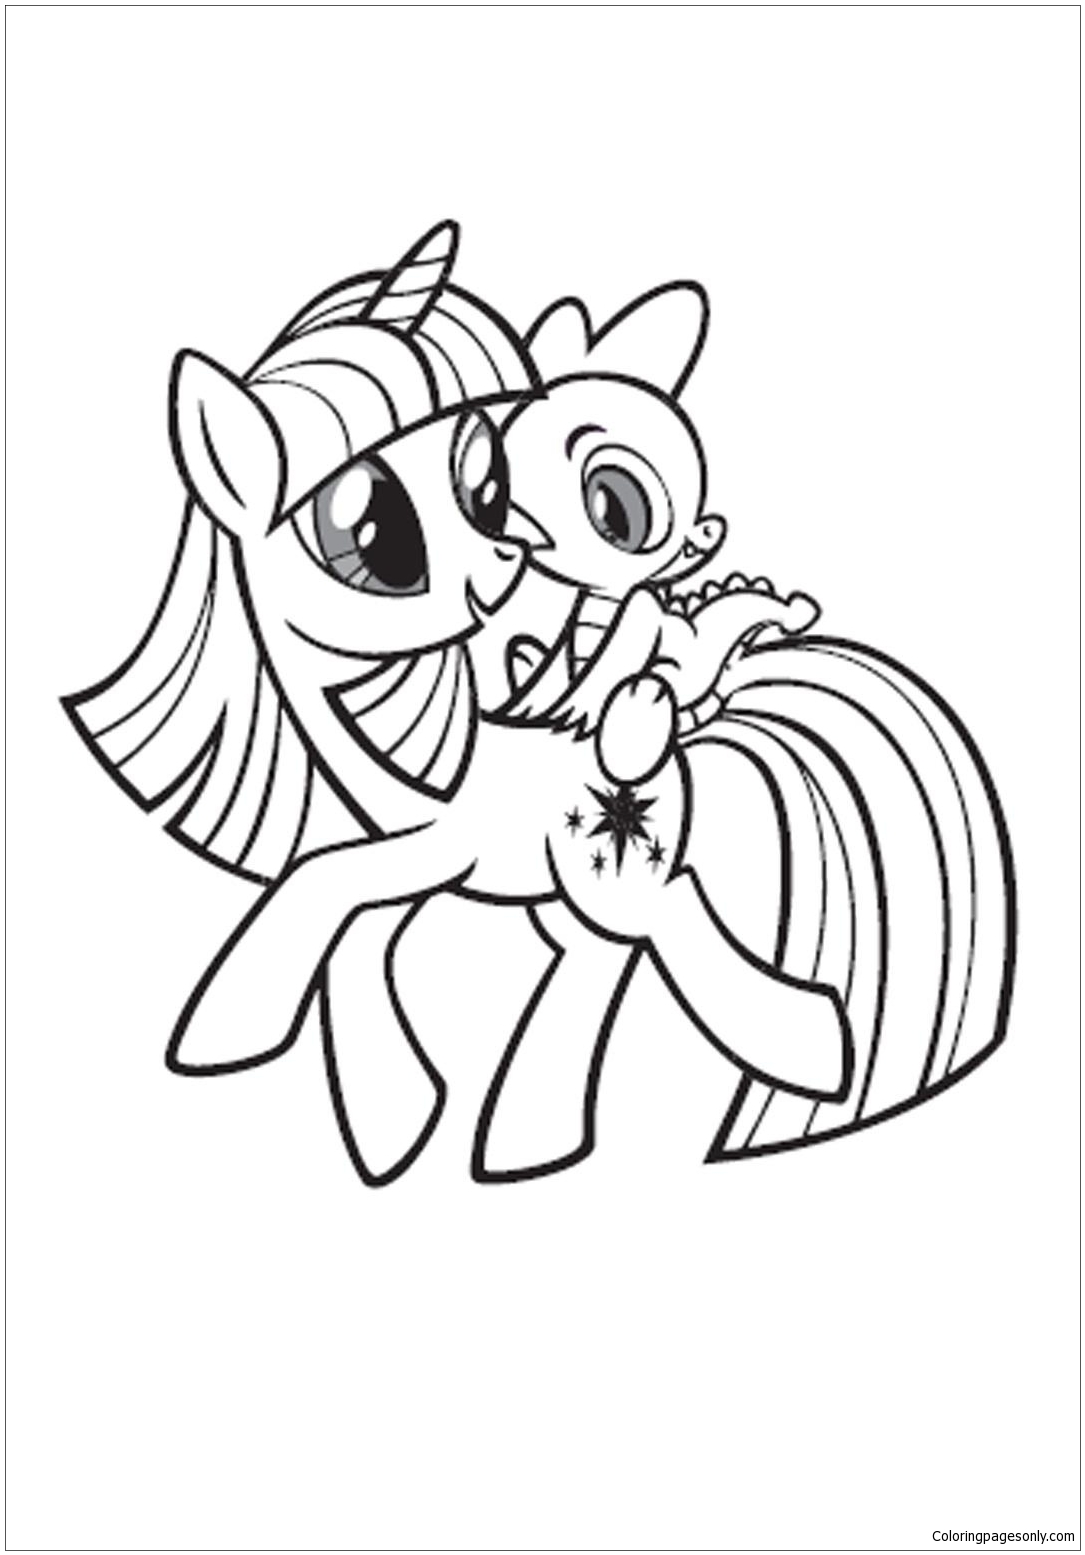 Baby Dinosaur With My Little Pony Coloring Pages Cartoons Coloring Pages Coloring Pages For Kids And Adults